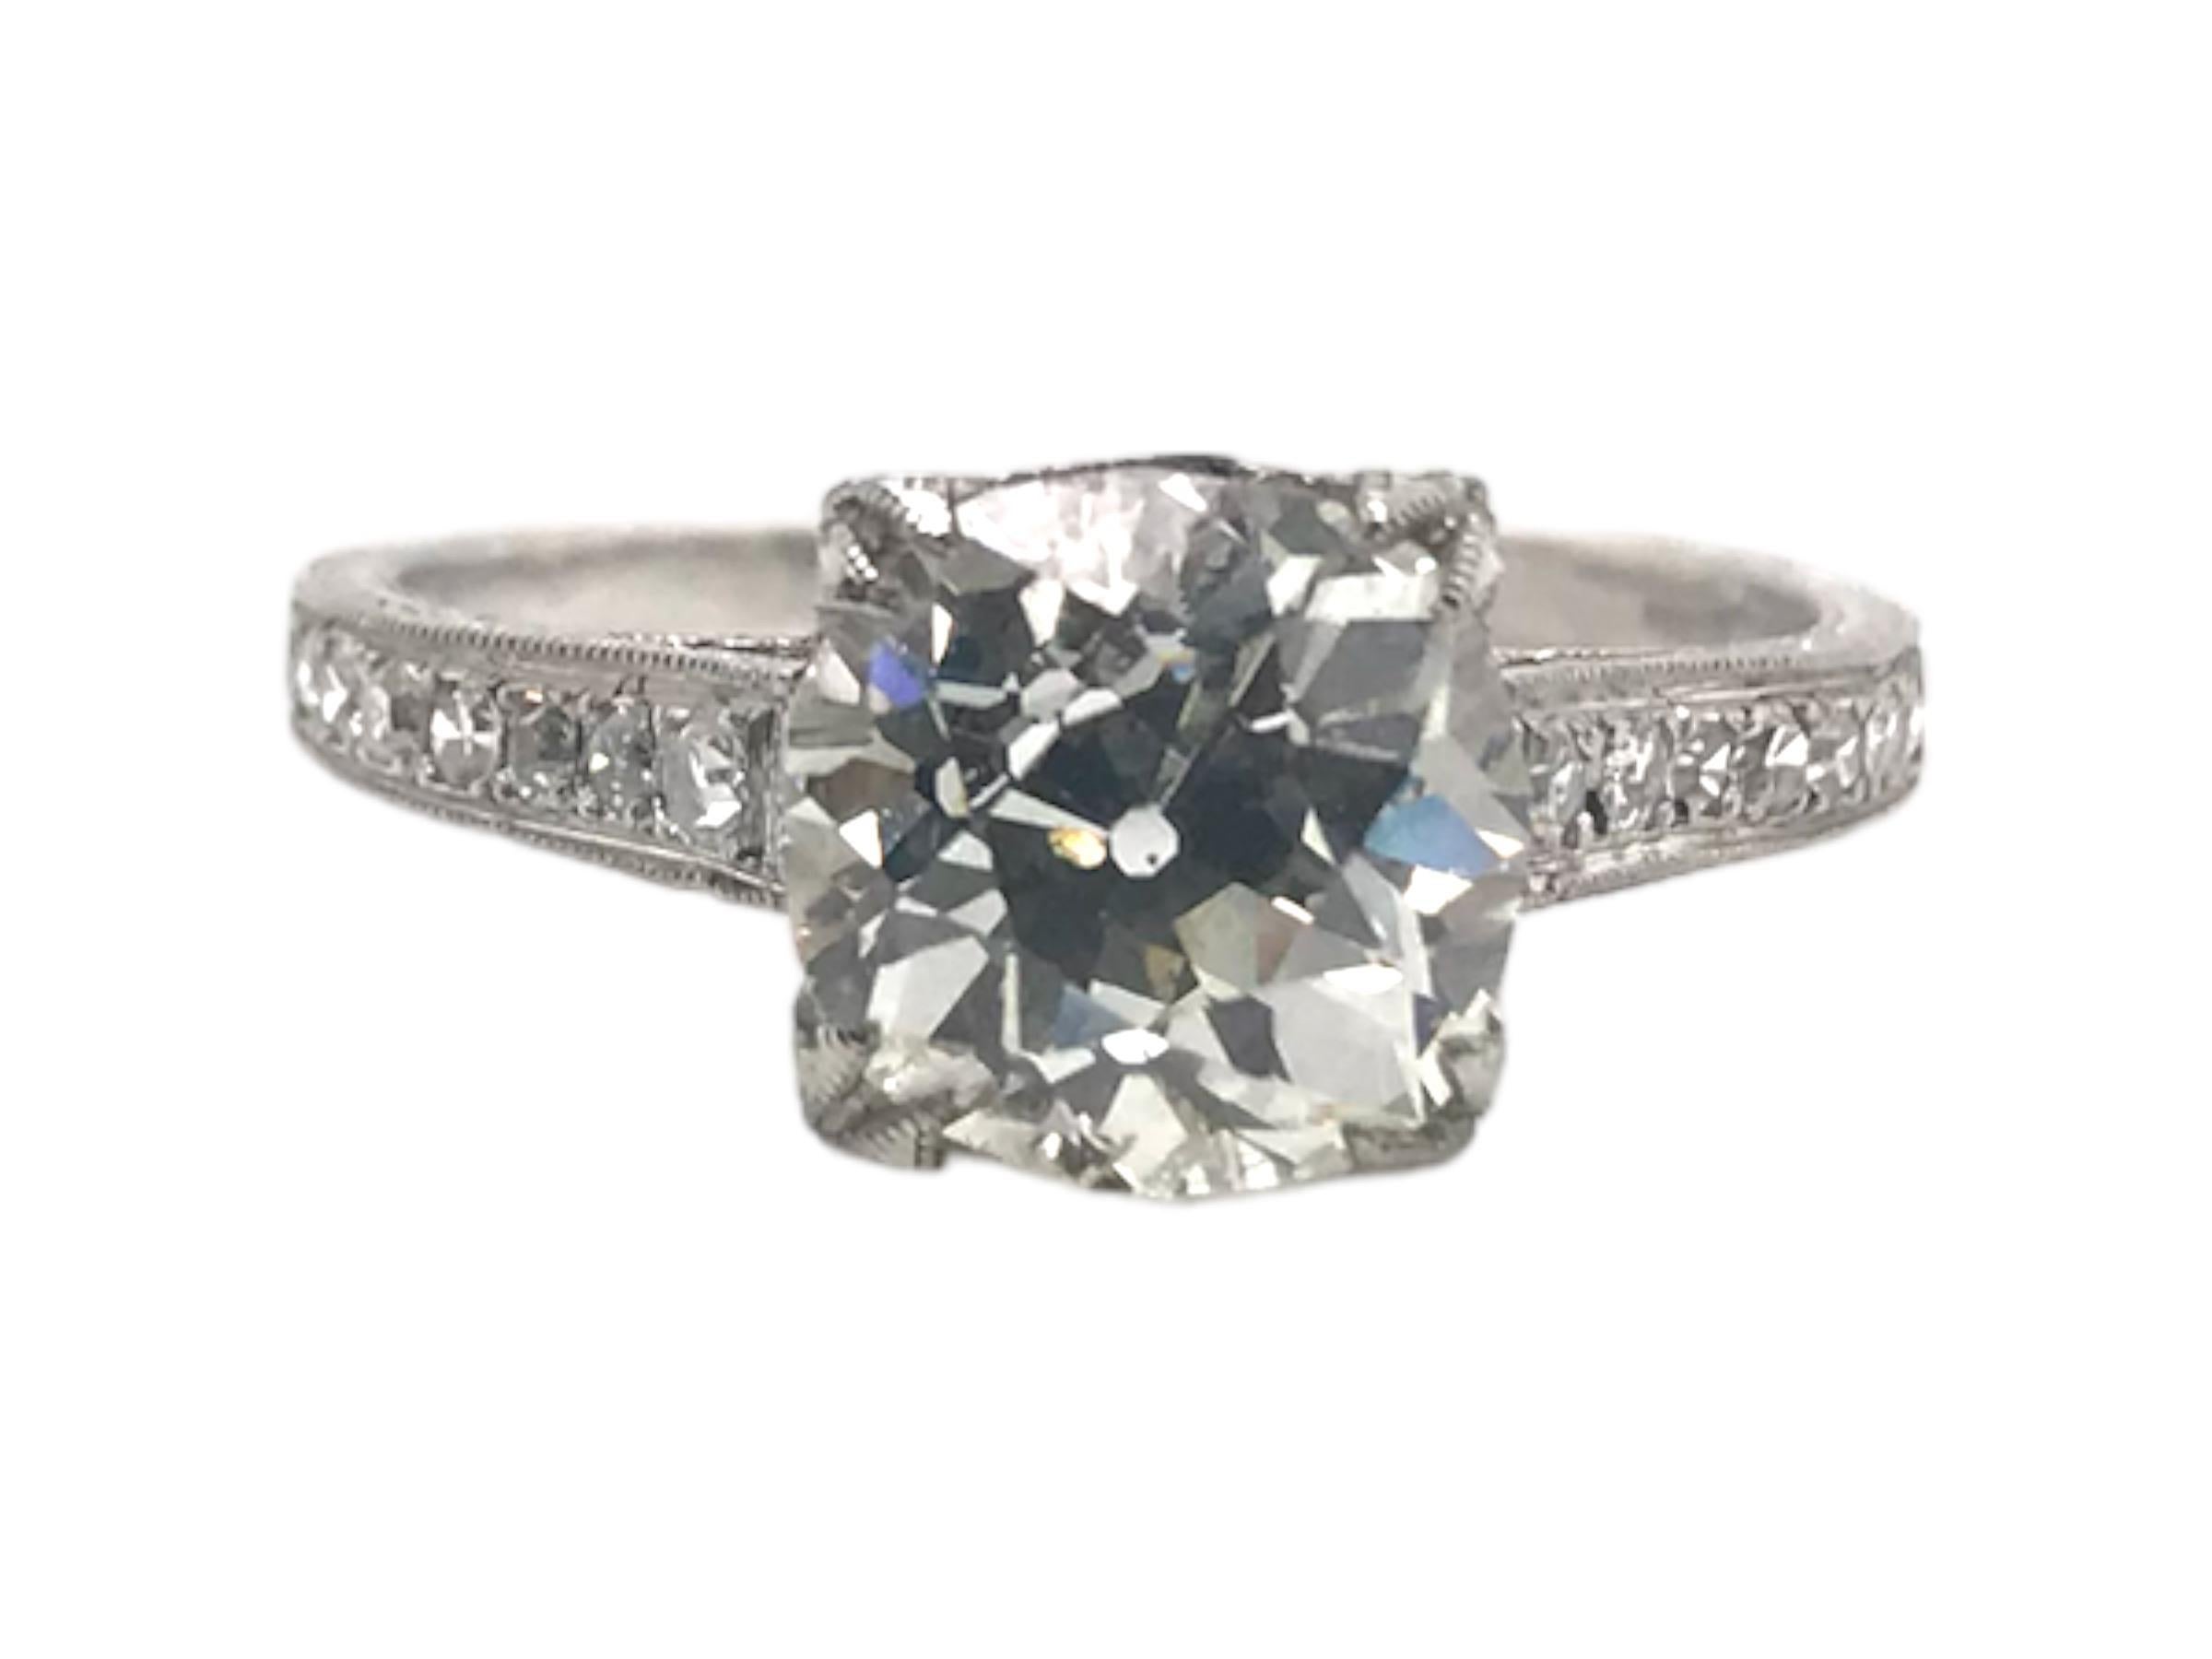 Edwardian Era Platinum 2.21 Carat Old Mine Cut Engagement Ring In Excellent Condition For Sale In Montgomery, AL